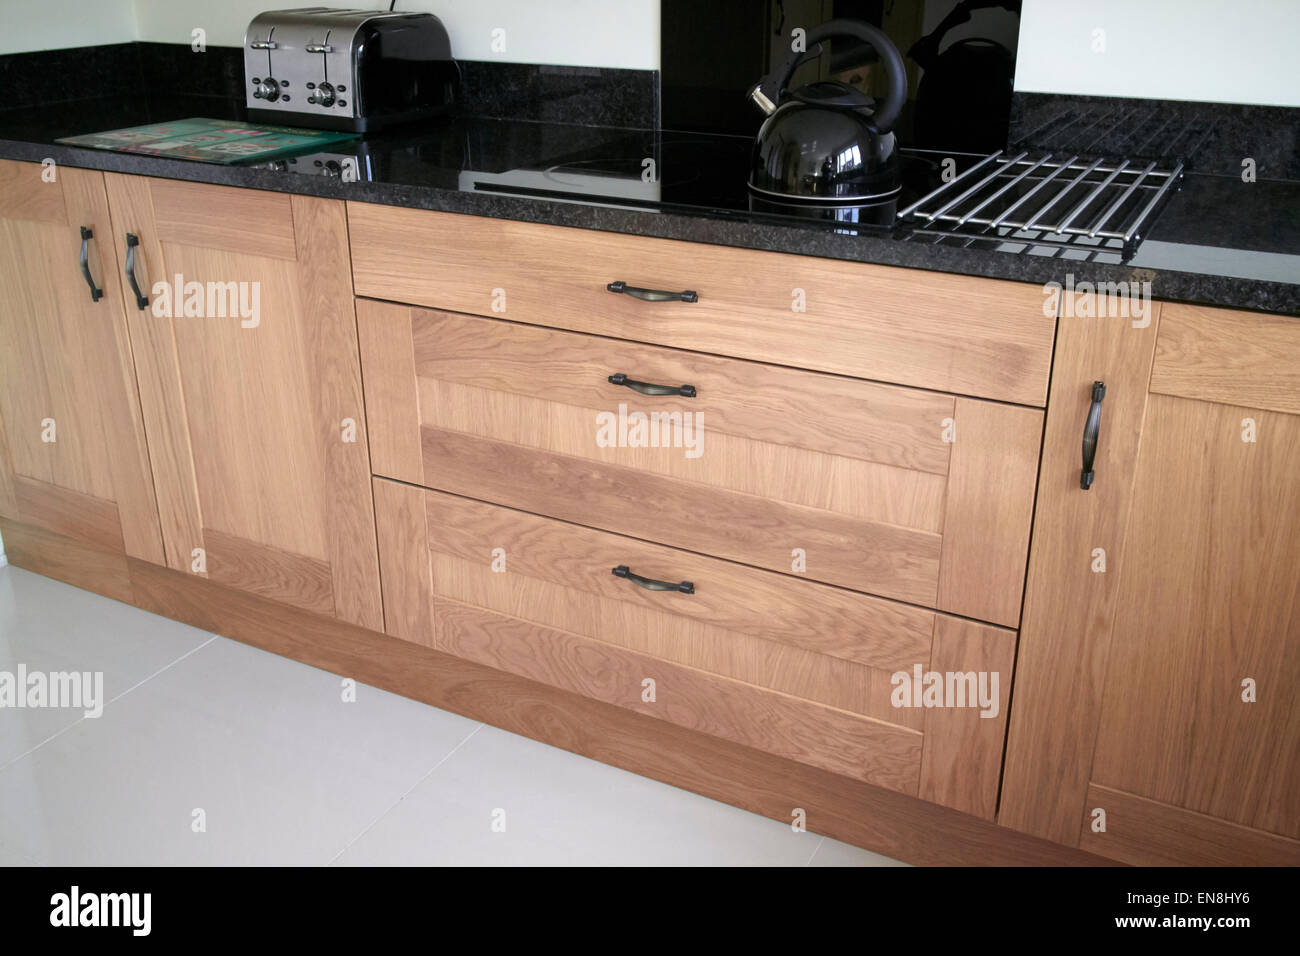 brand new kitchen cabinets and granite worktops in a new build property in the uk Stock Photo